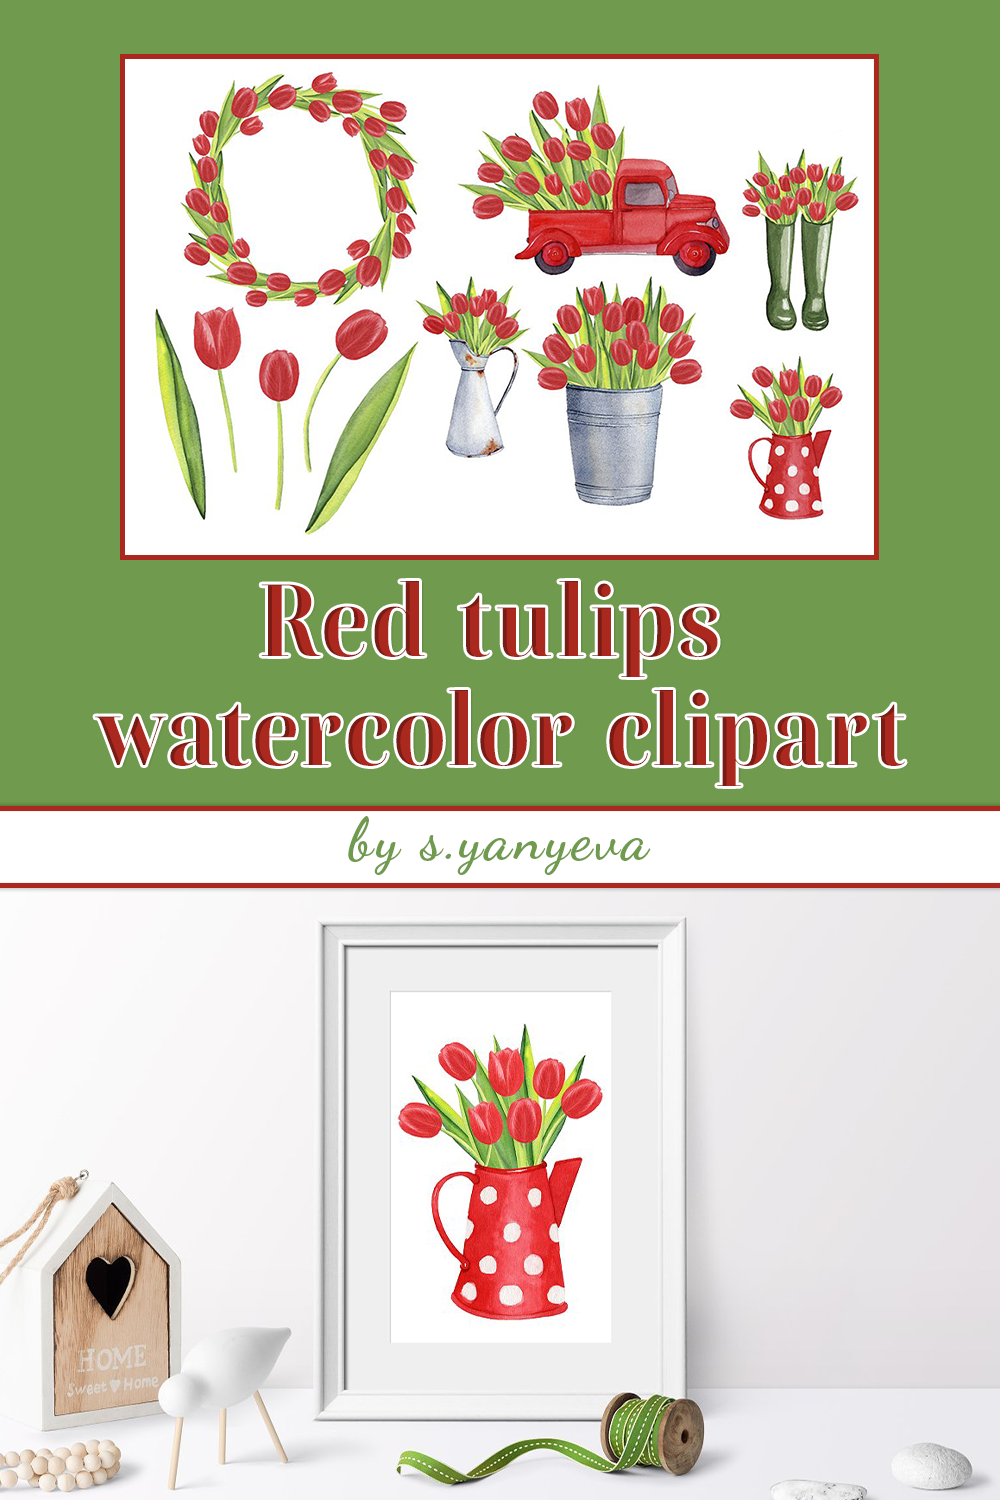 Red tulips watercolor clipart of pinterest.